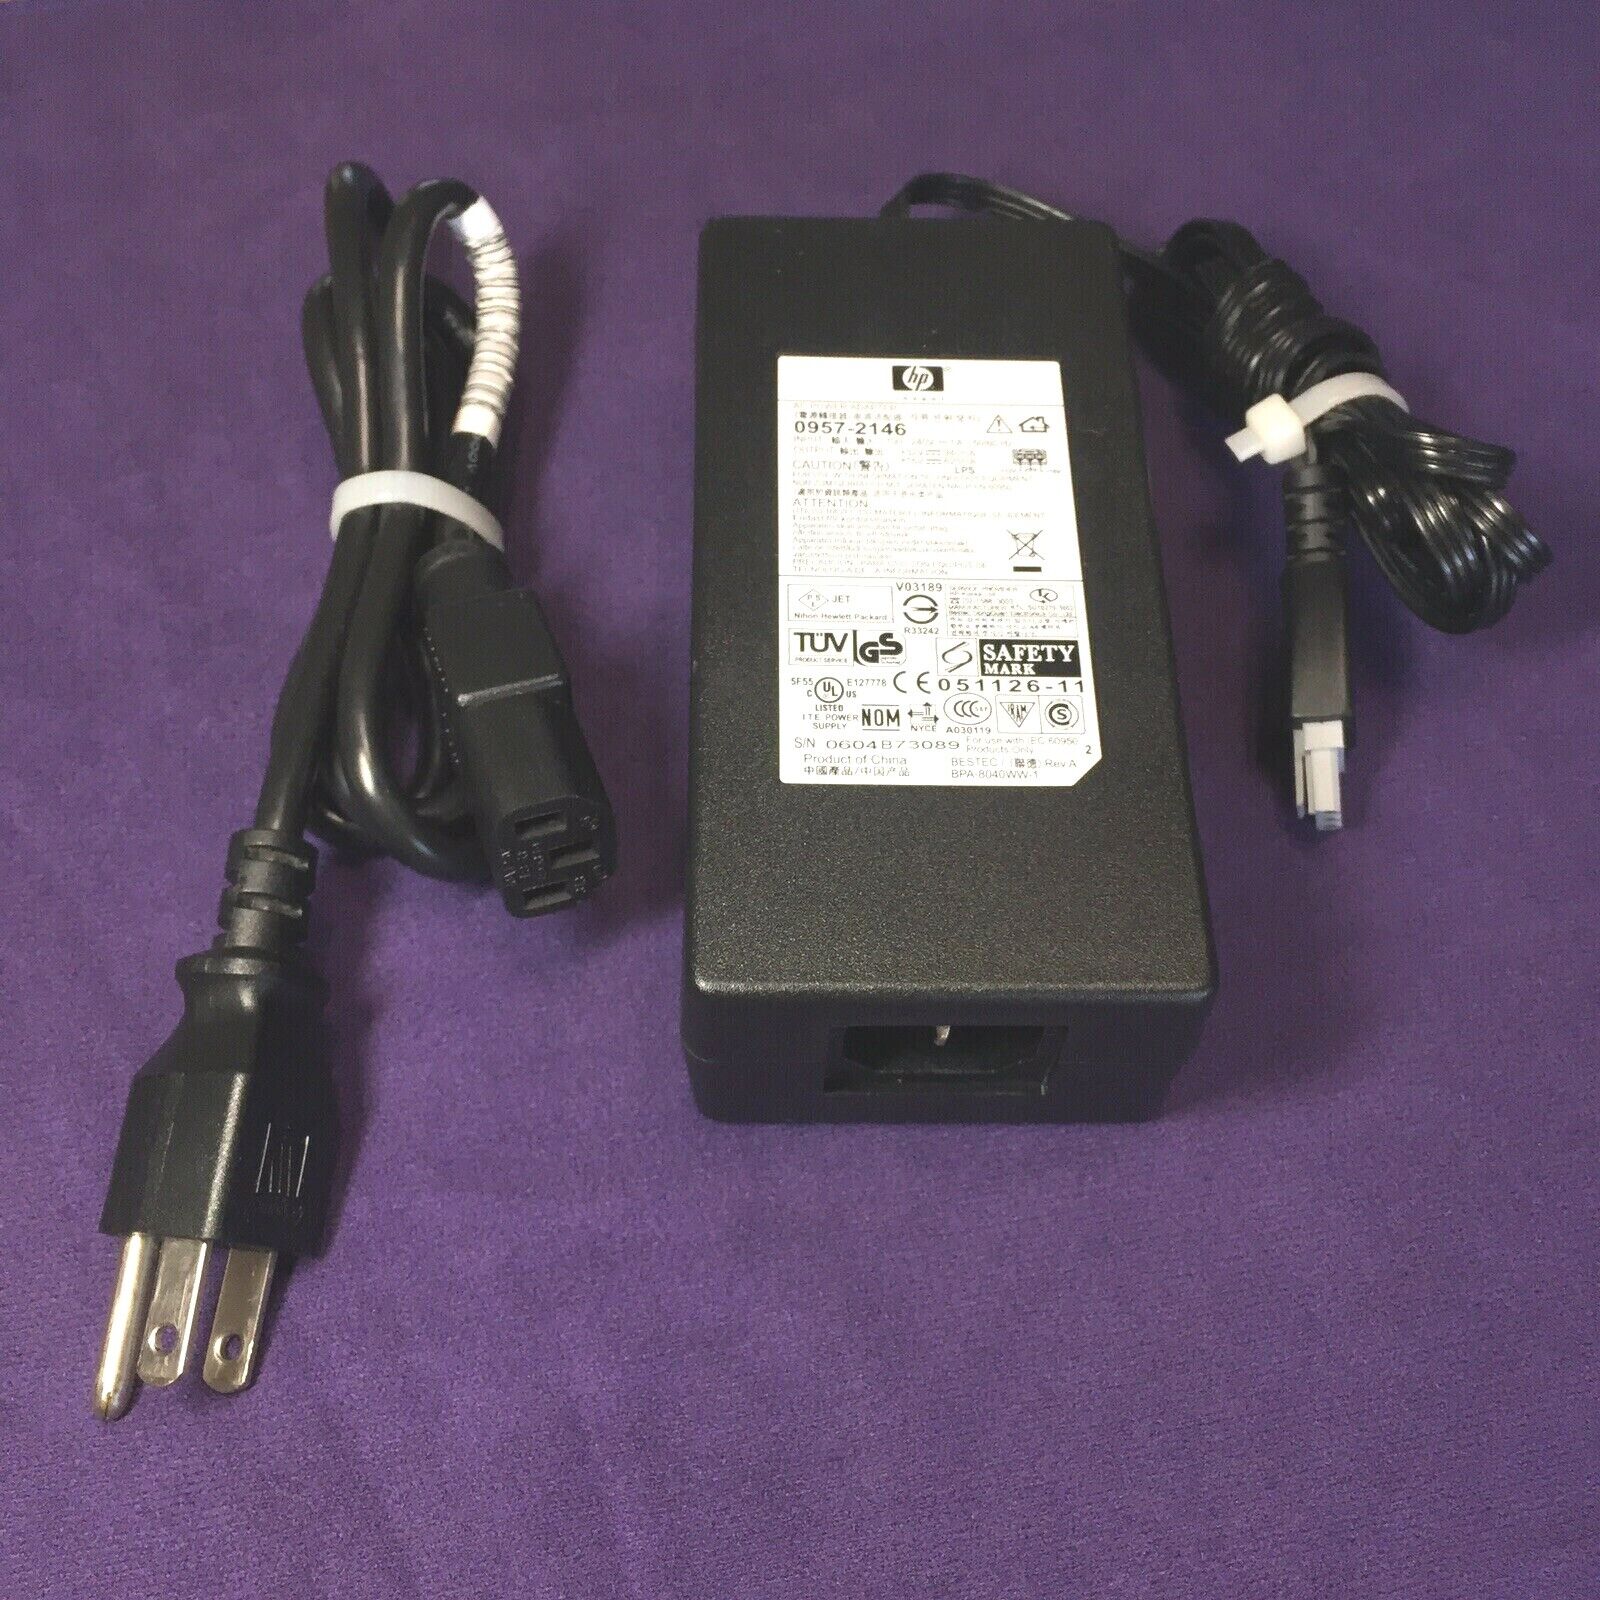 HP Invent AC Power Adapter 0957-2146 Charger 100- 240V With Longwell Power Cord